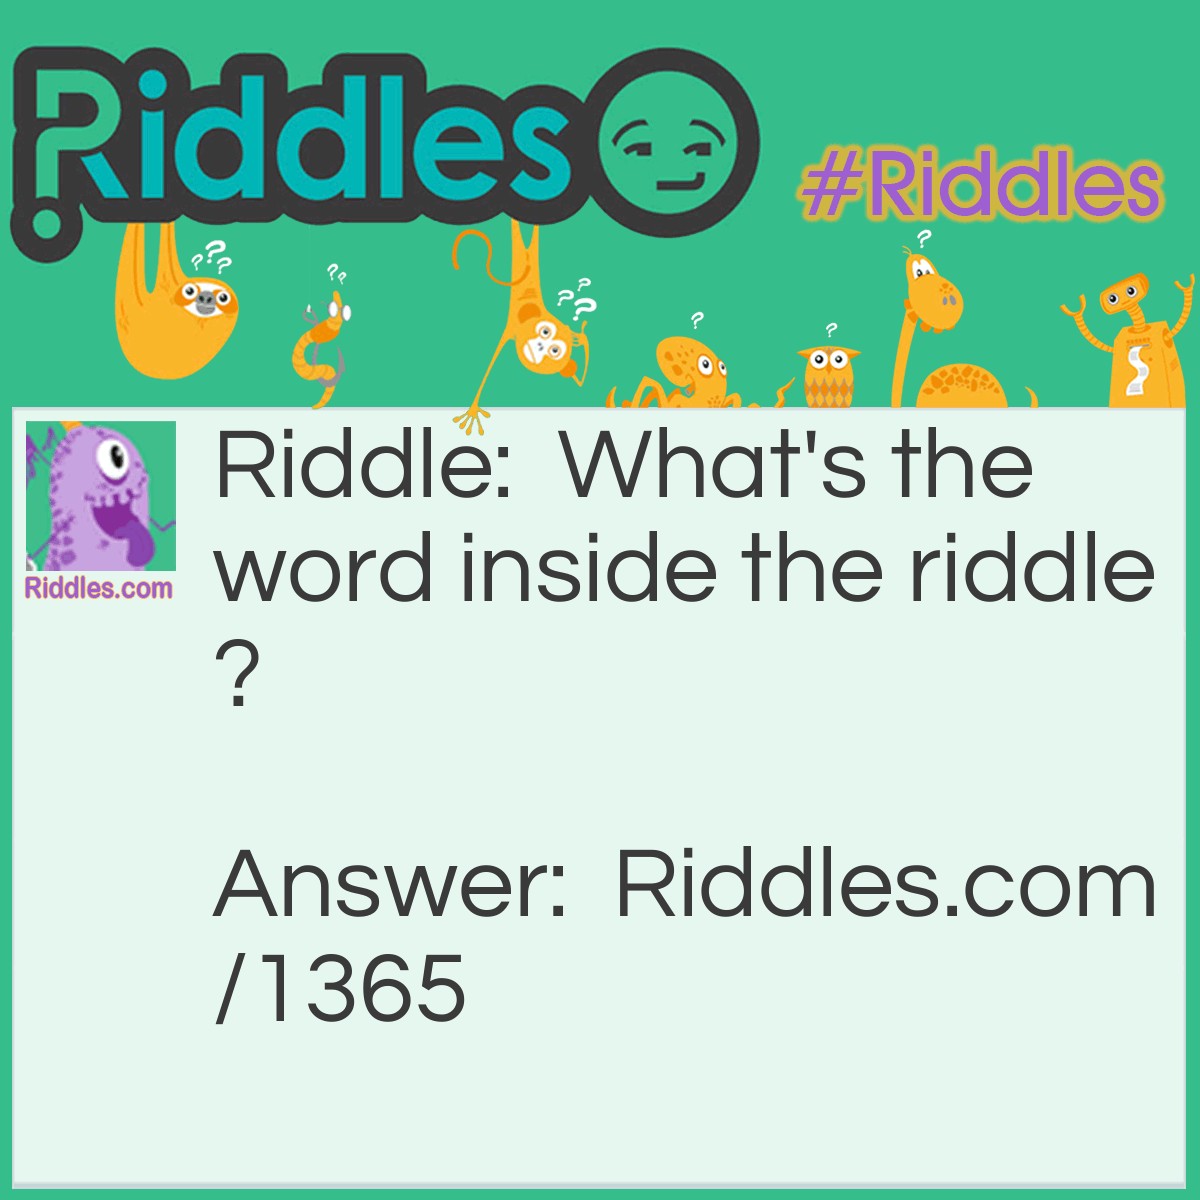 Riddle: What's the word inside the riddle? Answer: The iddl.